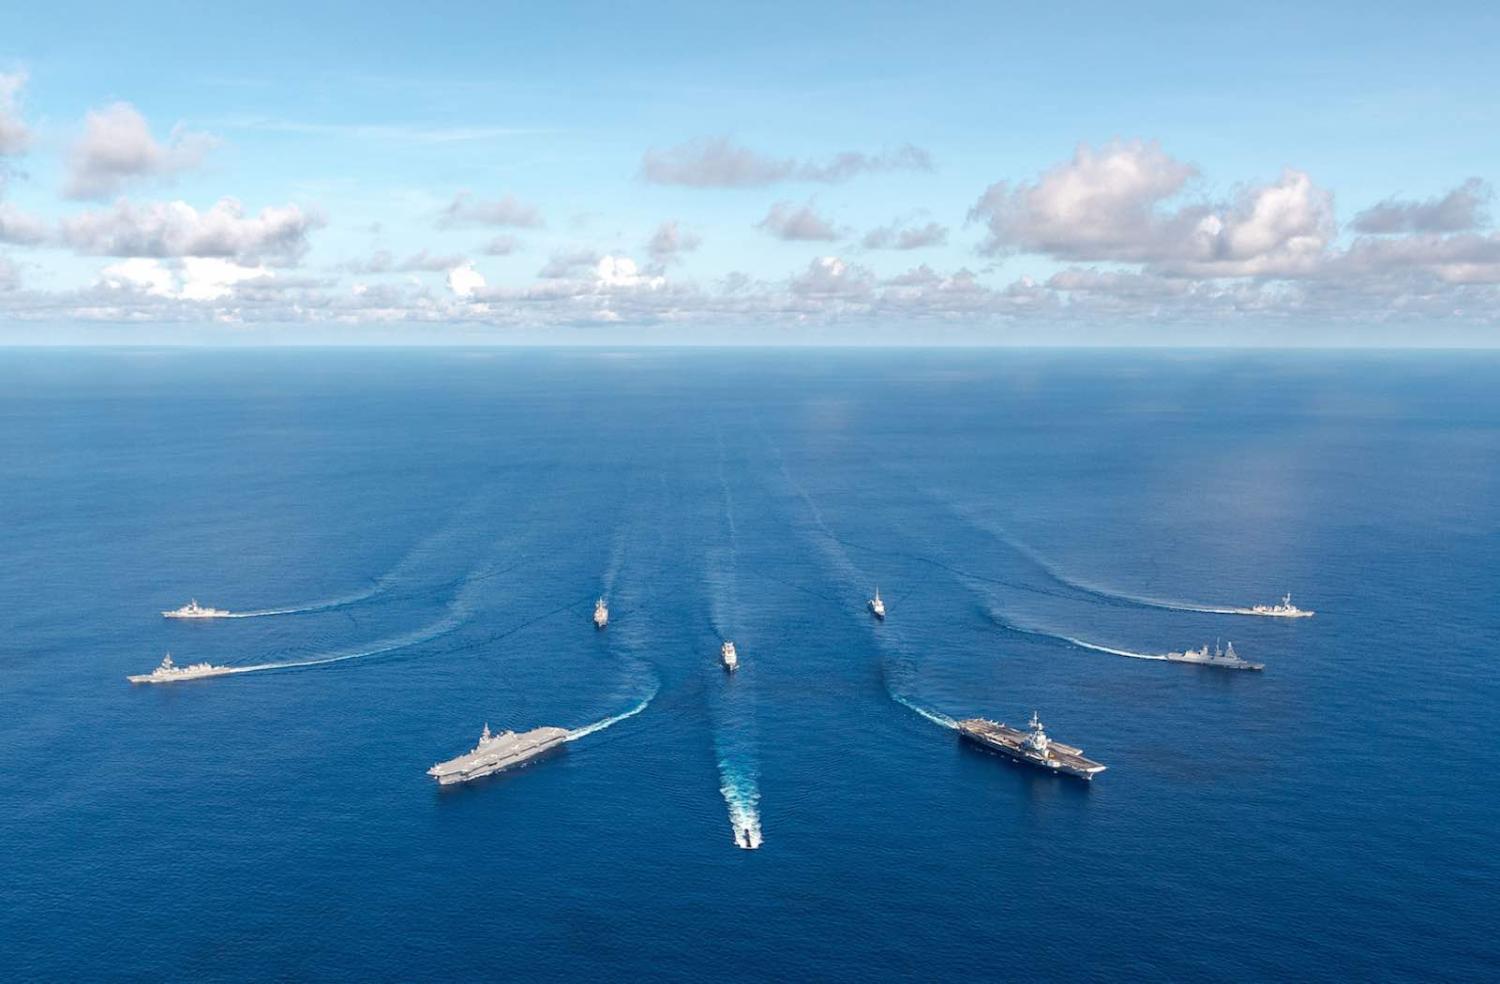 “La Pérouse” joint naval exercises in the Bay of Bengal, May 2019, with ships from Australia, France, Japan, and the US (Clarisse Dupont/Marine Nationale via ADF)